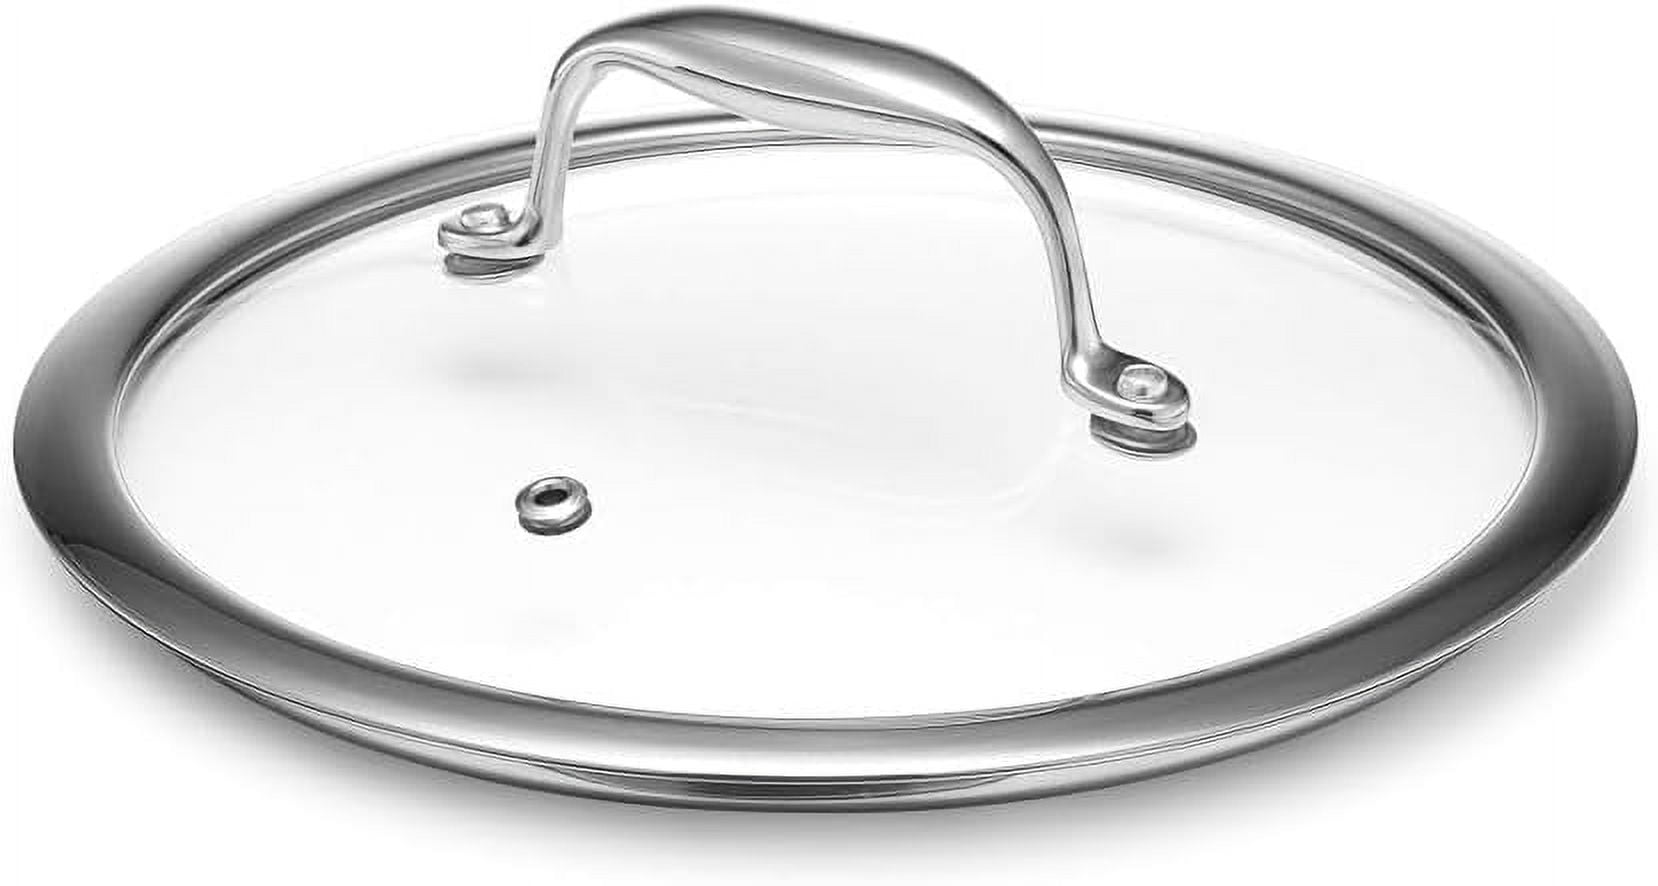 HexClad 8-inch Cooking Glass Lid, Designed for HexClad Hybrid